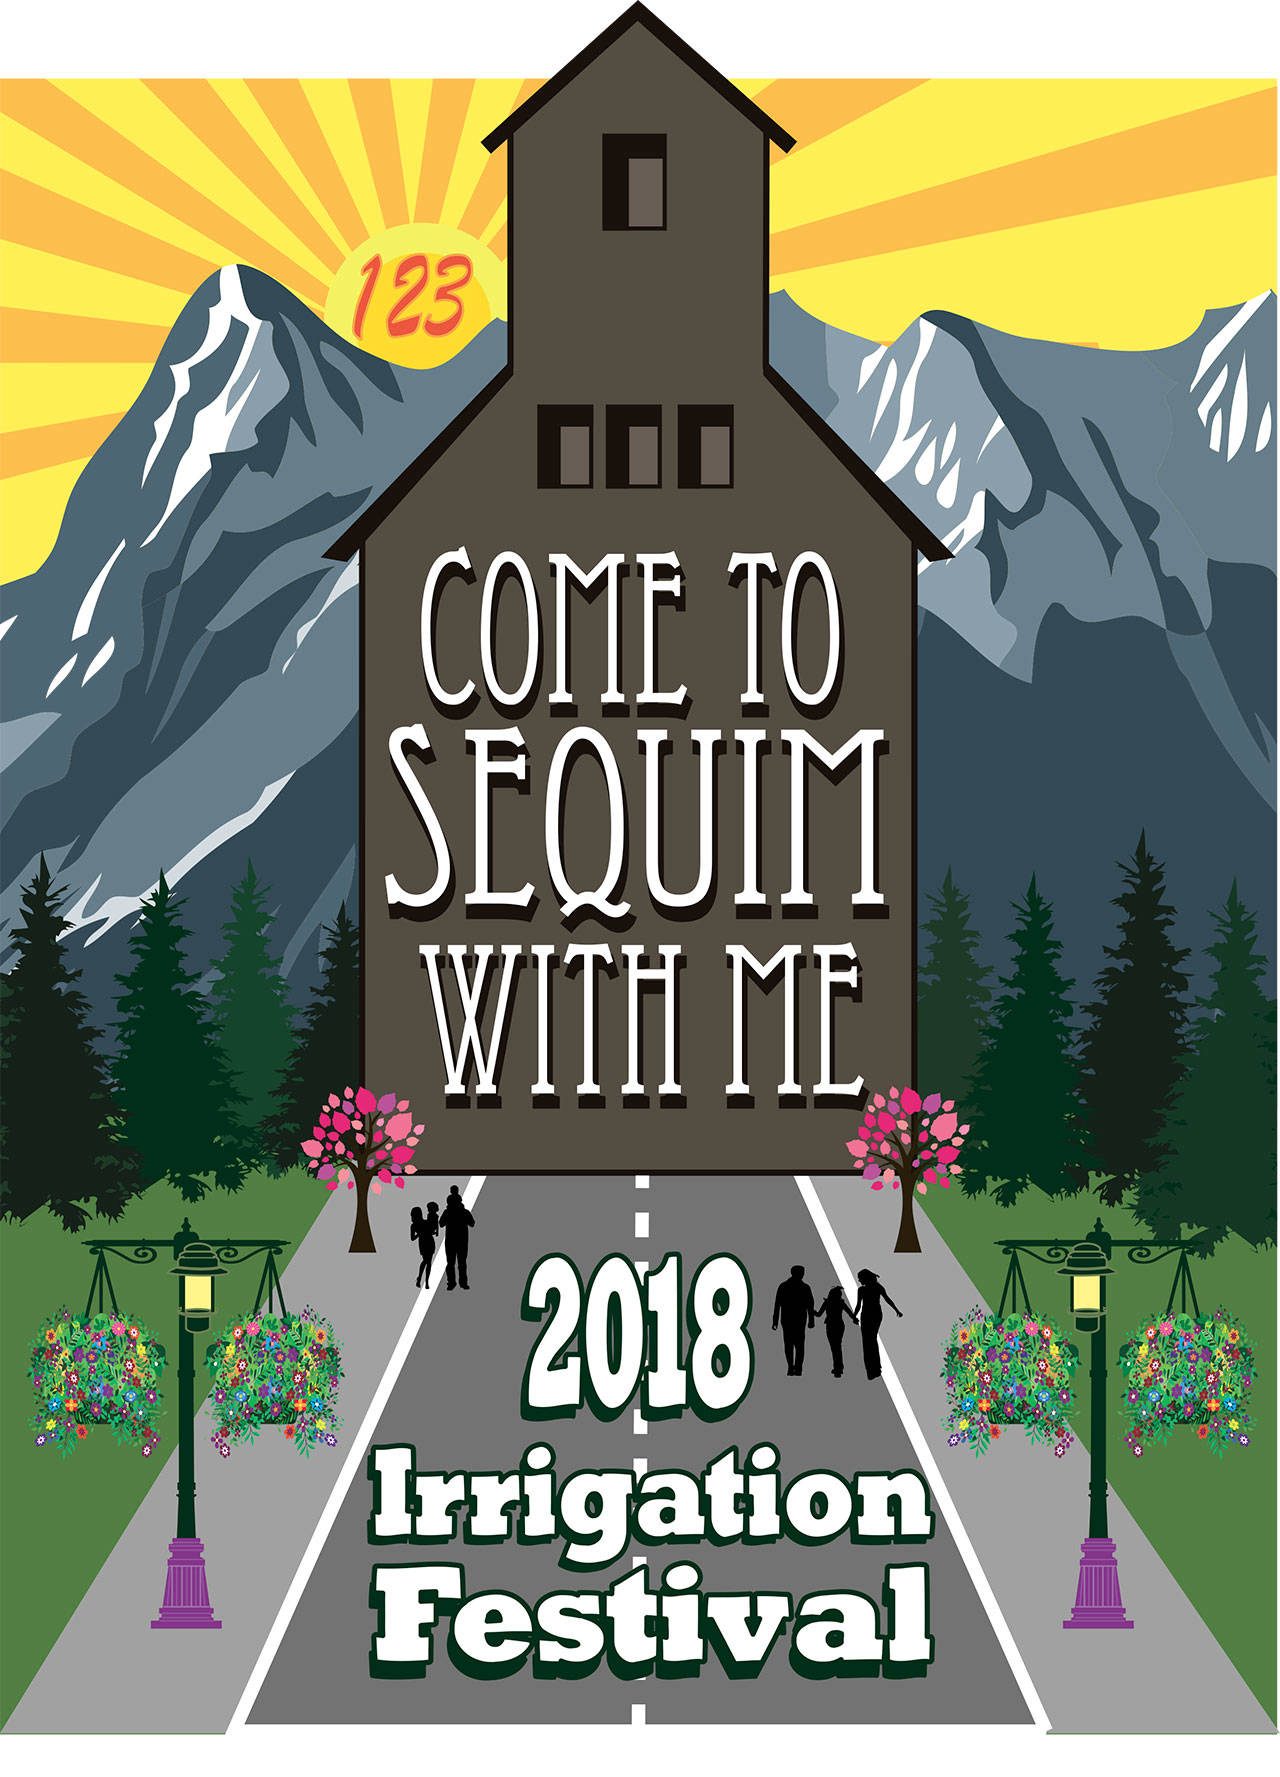 Laura Friedkin designed next year’s logo for the Sequim Irrigation Festival. Submitted graphic